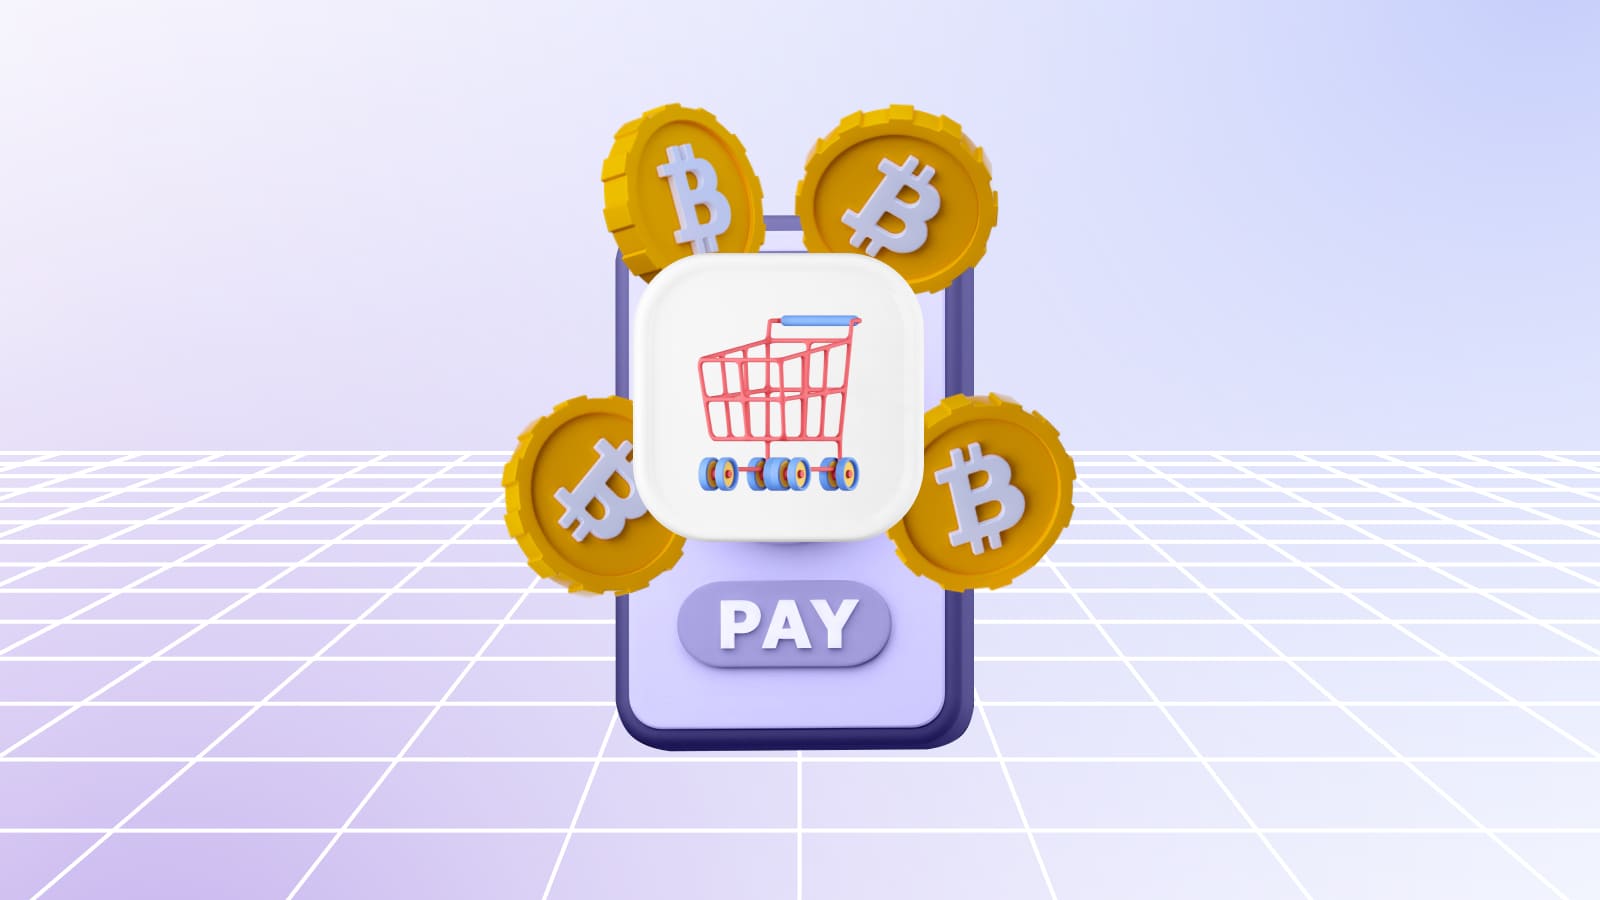 How to pay with bitcoins for goods and services in an online store?